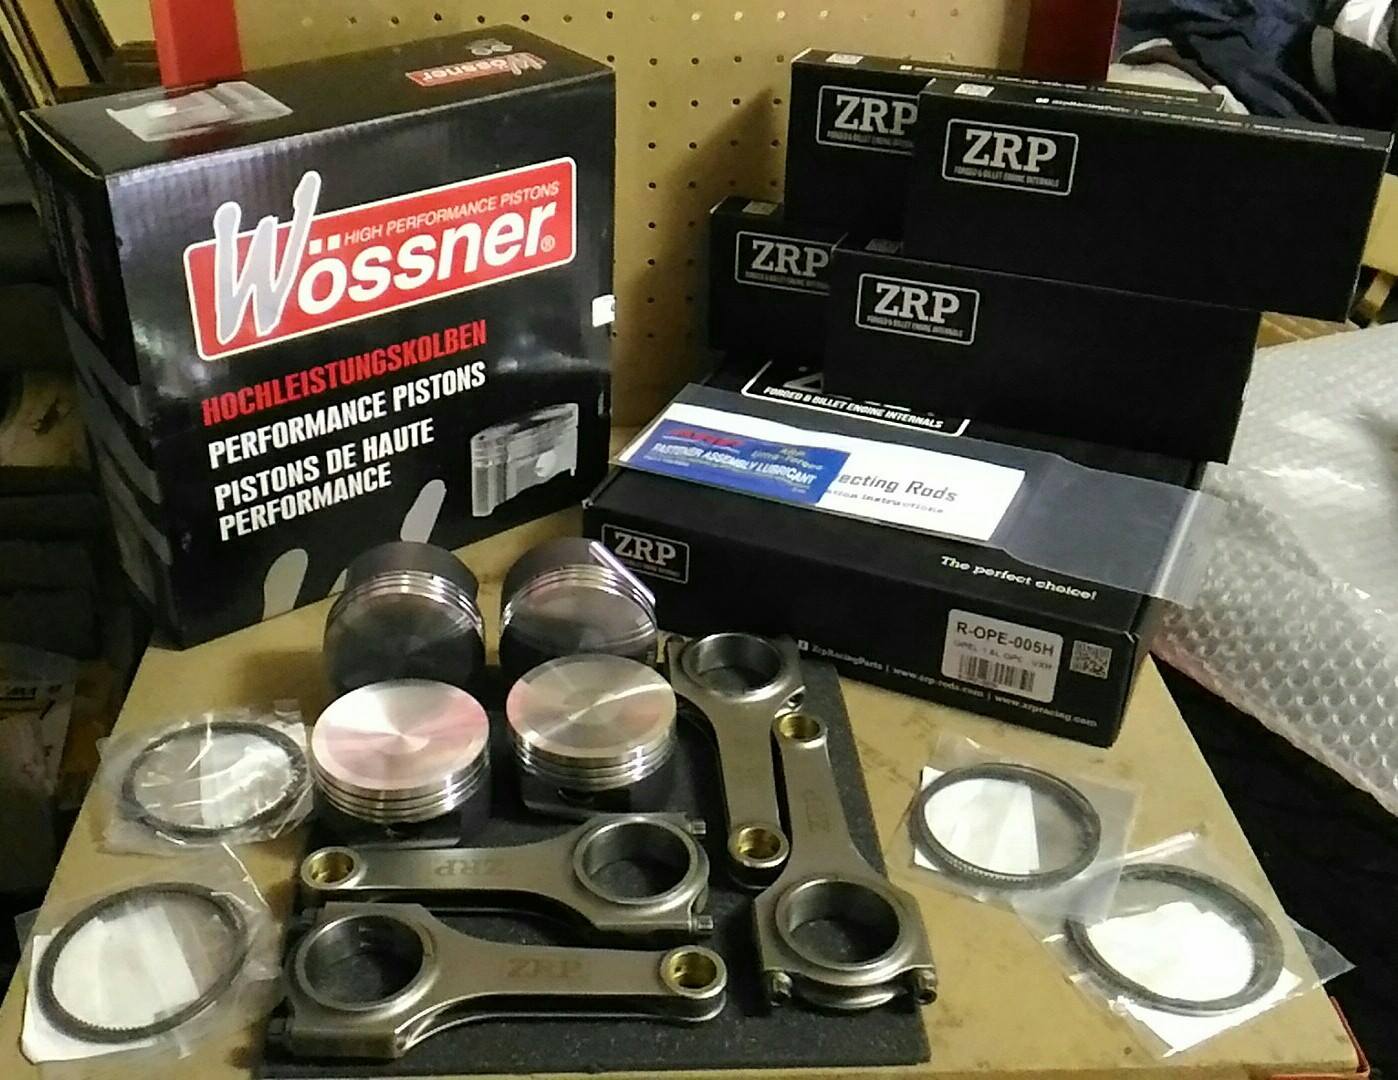 KIT ZRP Con-Rods + Wossner Forged Pistons per motore Opel Z16LE(x)